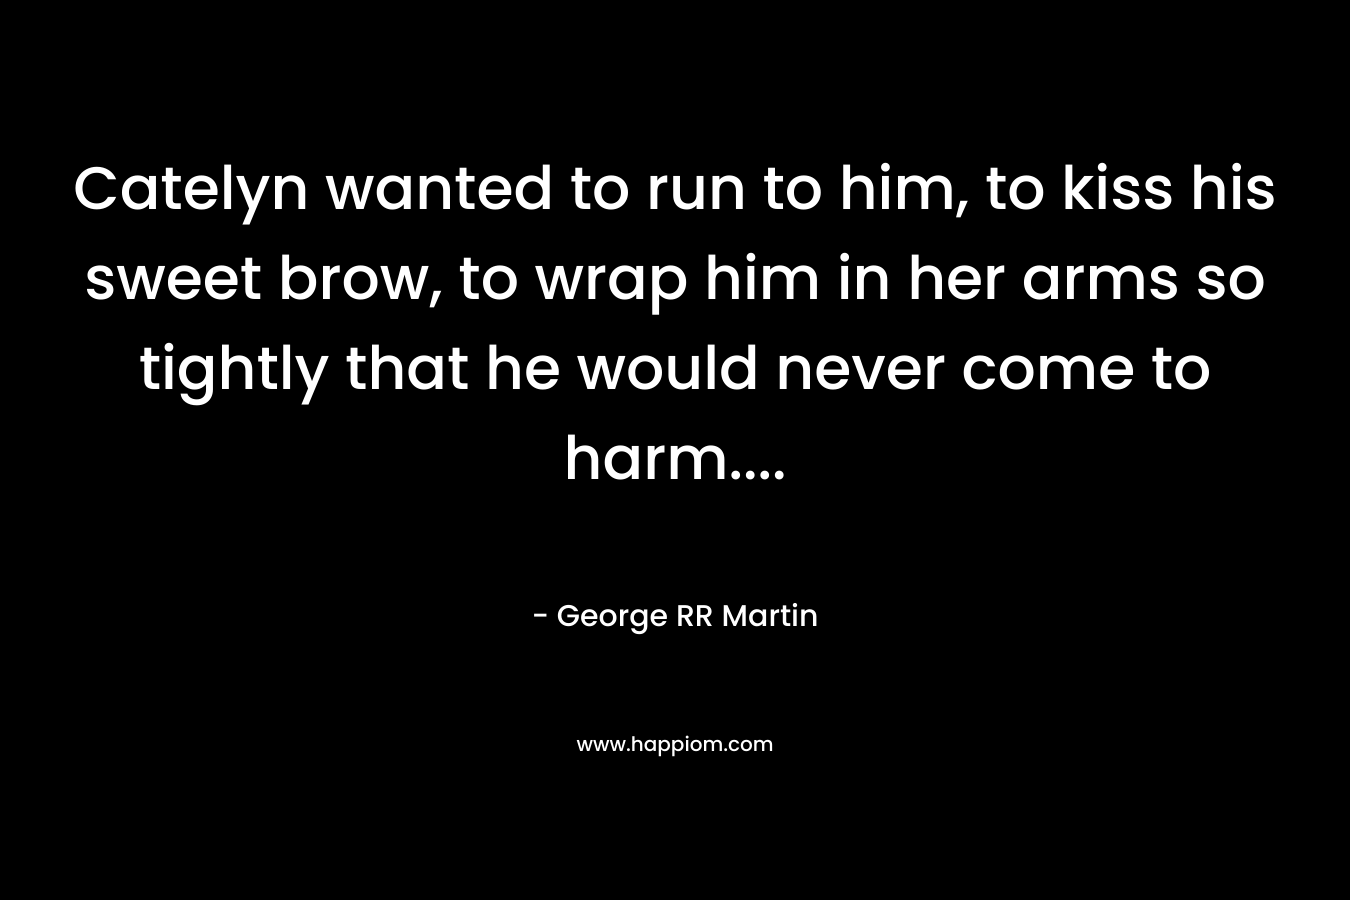 Catelyn wanted to run to him, to kiss his sweet brow, to wrap him in her arms so tightly that he would never come to harm....